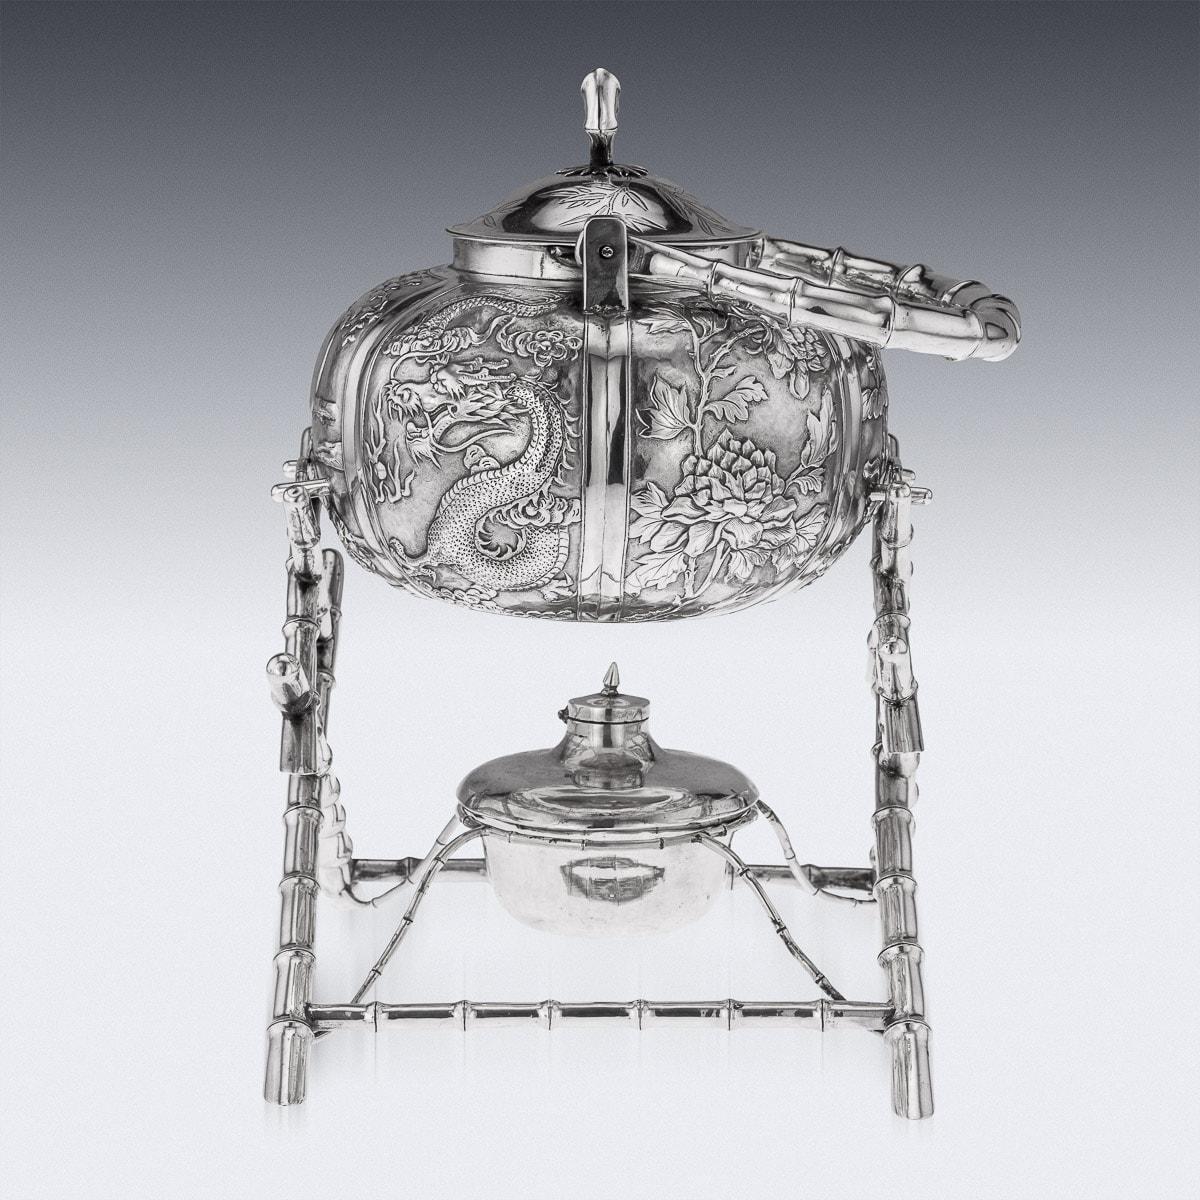 Antique early 20th century Chinese export solid silver tea kettle on stand, the body chased in relief with floral decoration, the domed lids mounted with a bamboo finial. The kettle is suspended on a stylised, well constructed bamboo stand, with a